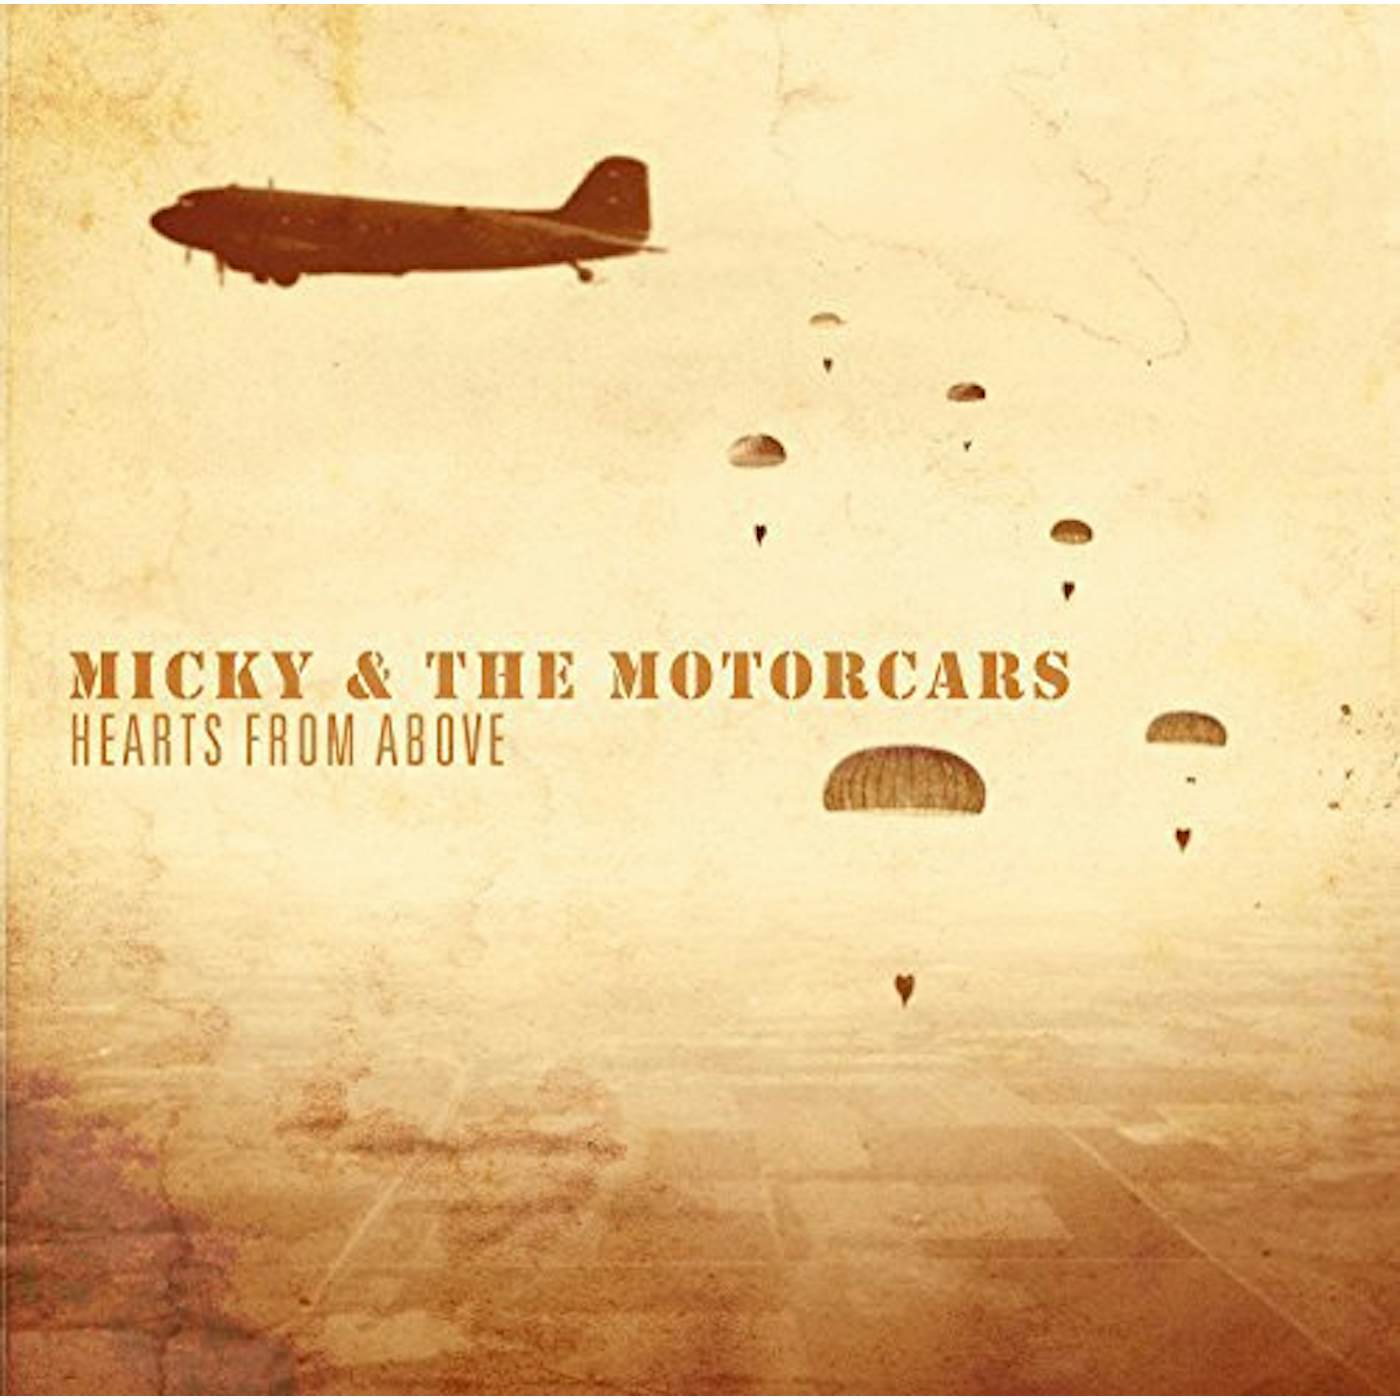 Micky & The Motorcars Hearts From Above Vinyl Record